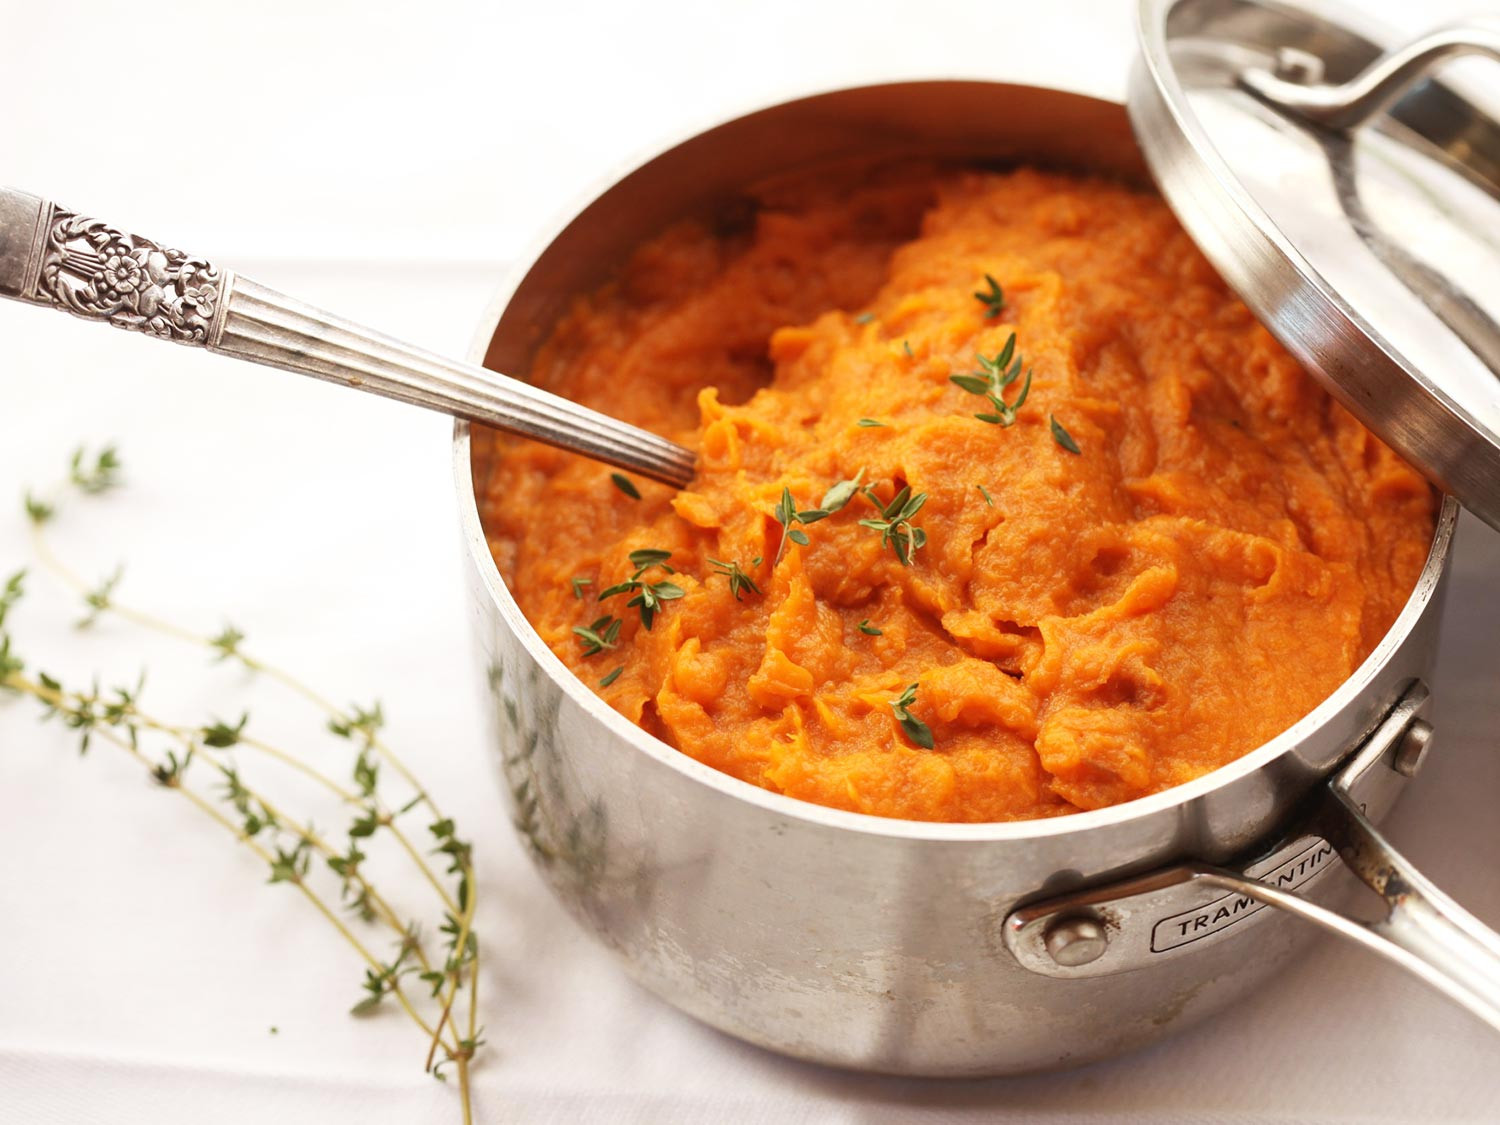 Mashed Sweet Potatoes Thanksgiving
 The Best Mashed Sweet Potatoes Recipe